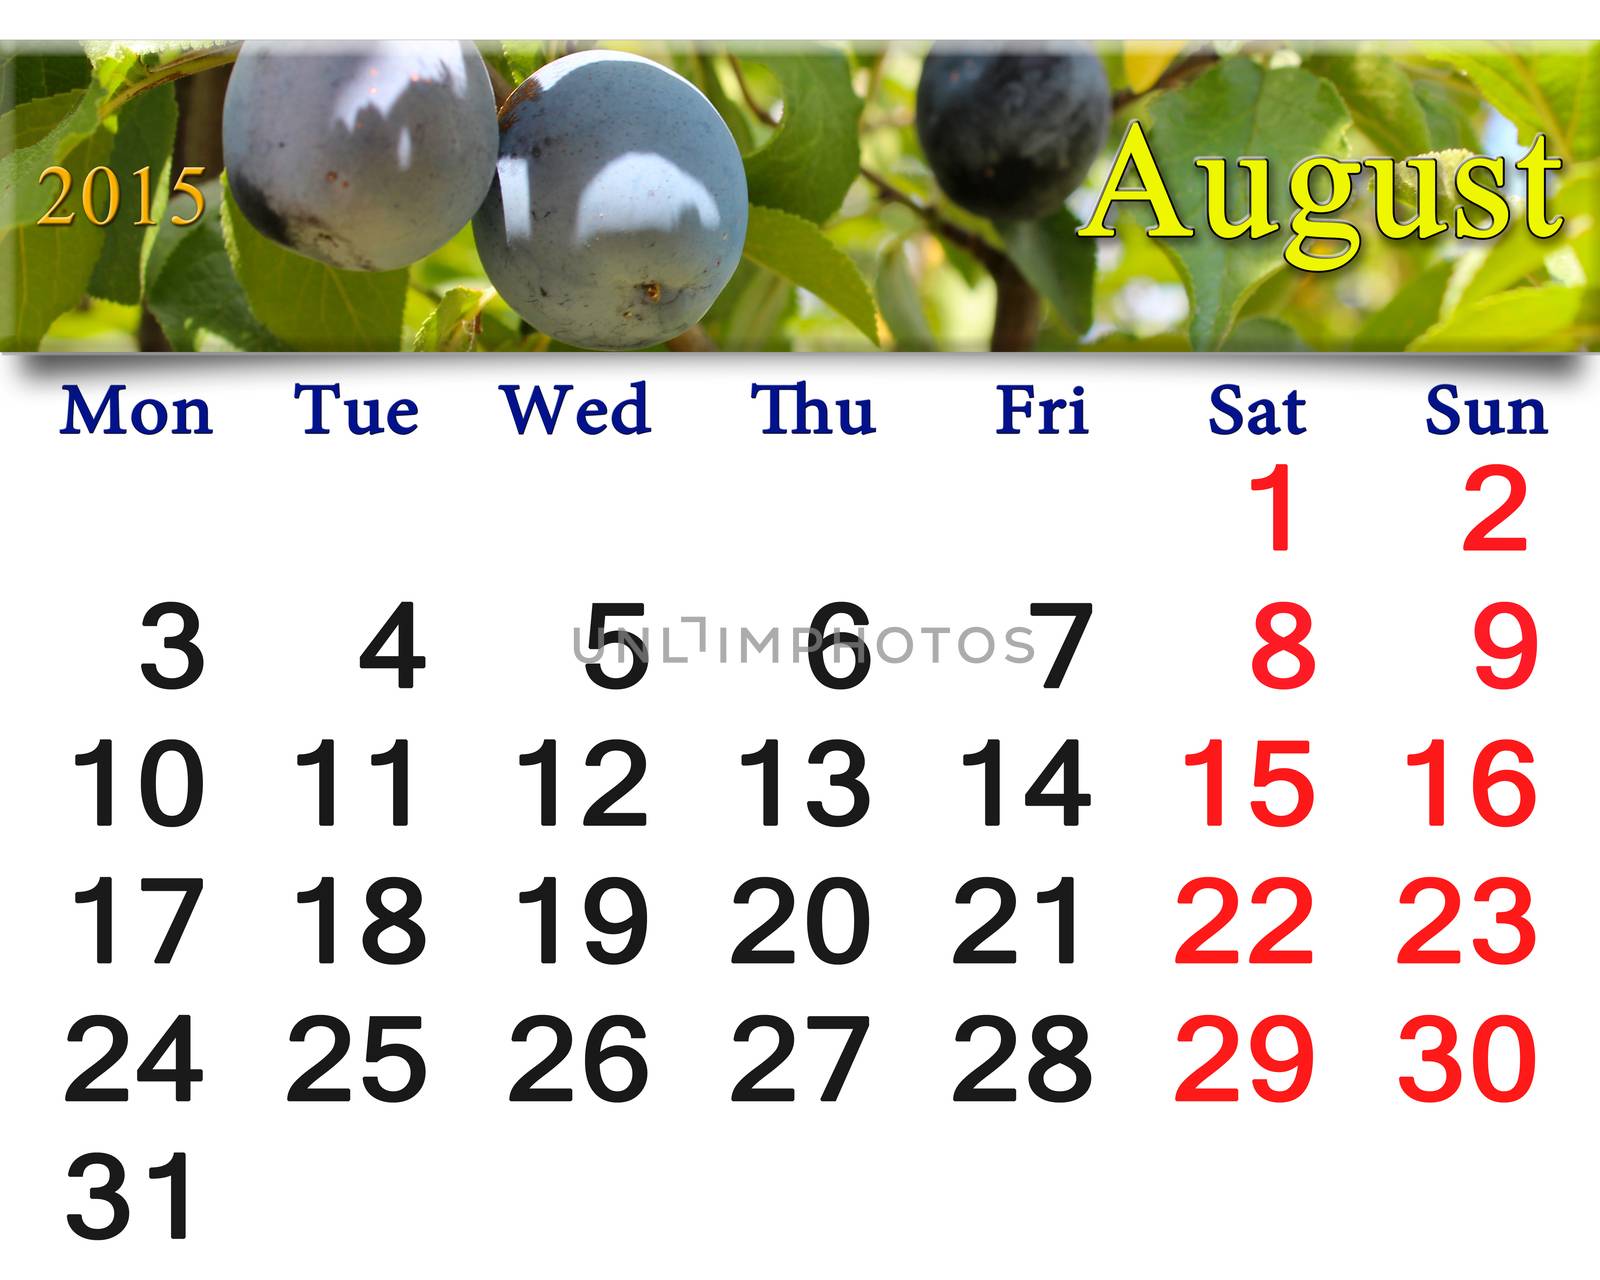 calendar for the August of 2015 year with plums by alexmak